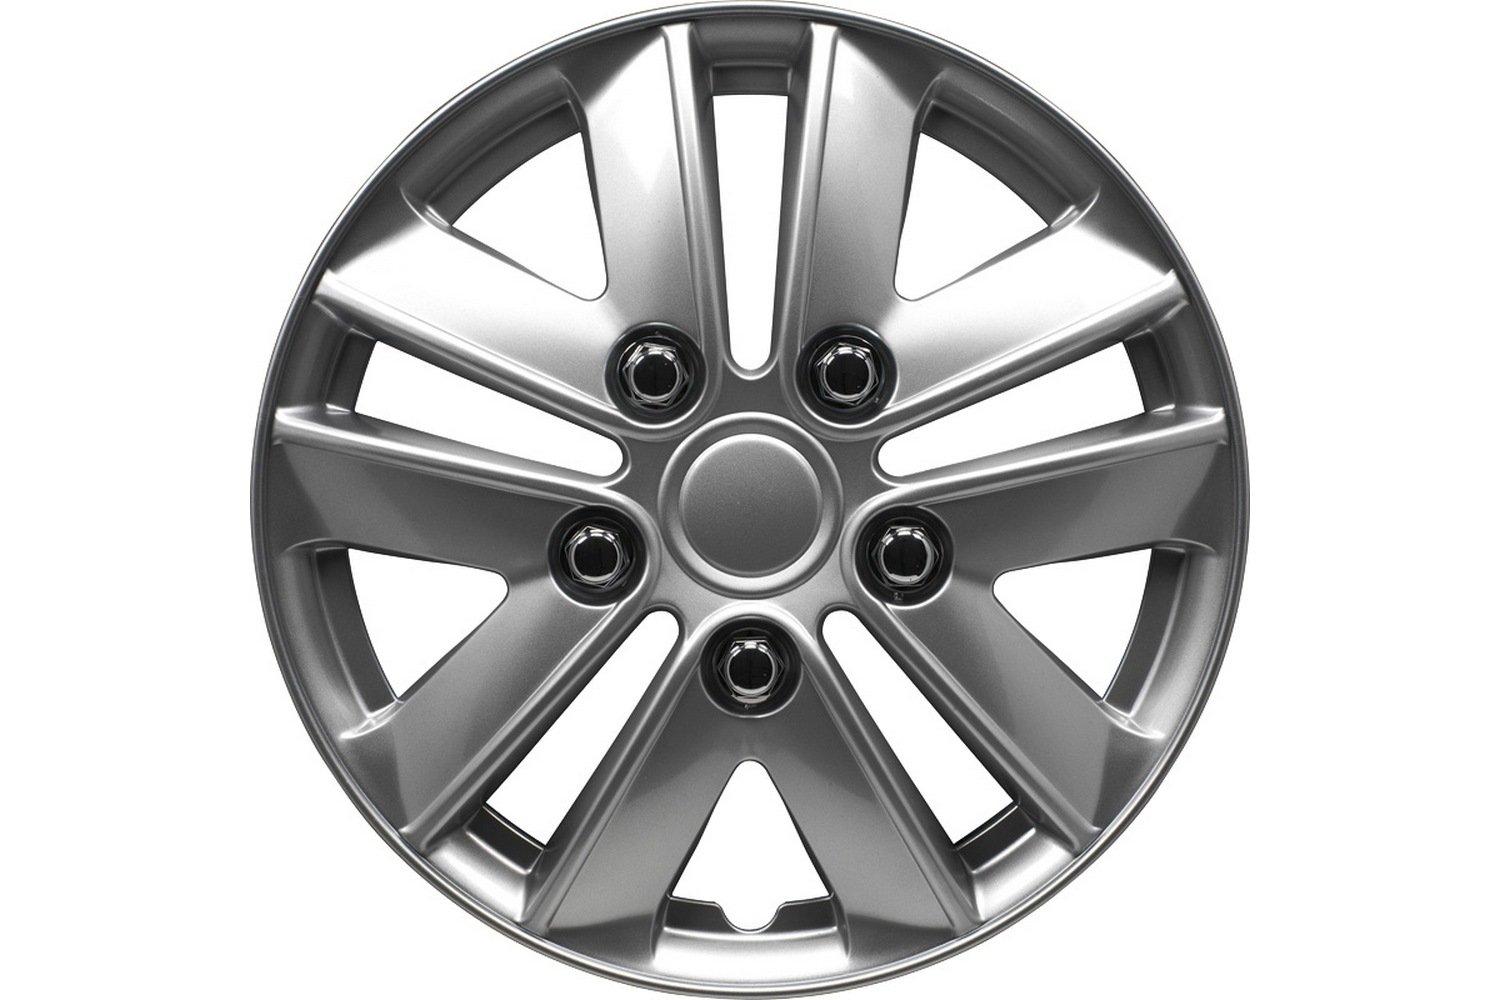 Wheel covers Kentucky 13 inch set 4 pieces